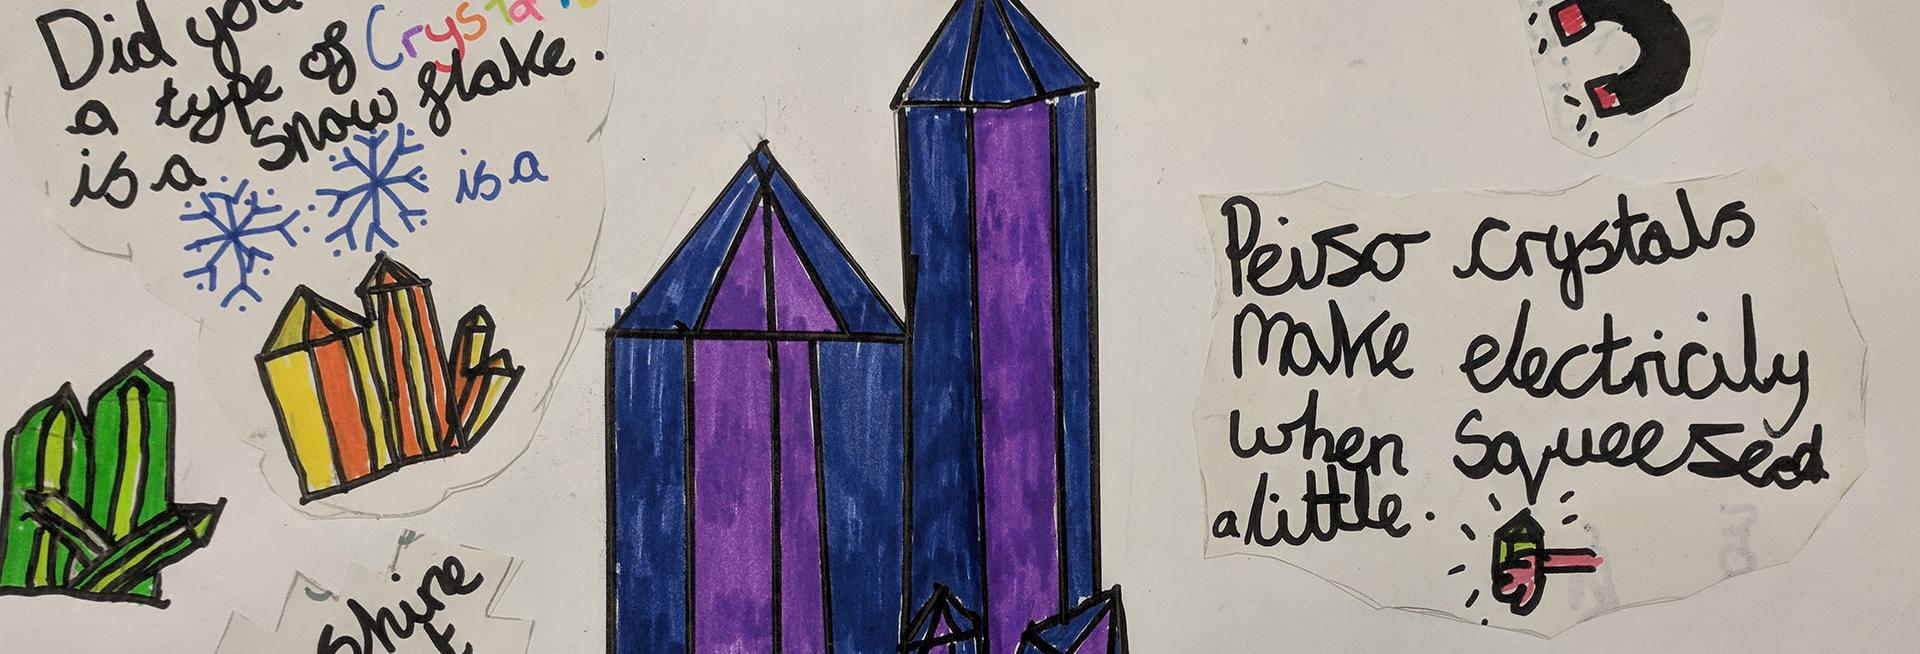 Year 5 pupil's hand-drawn poster about crystals